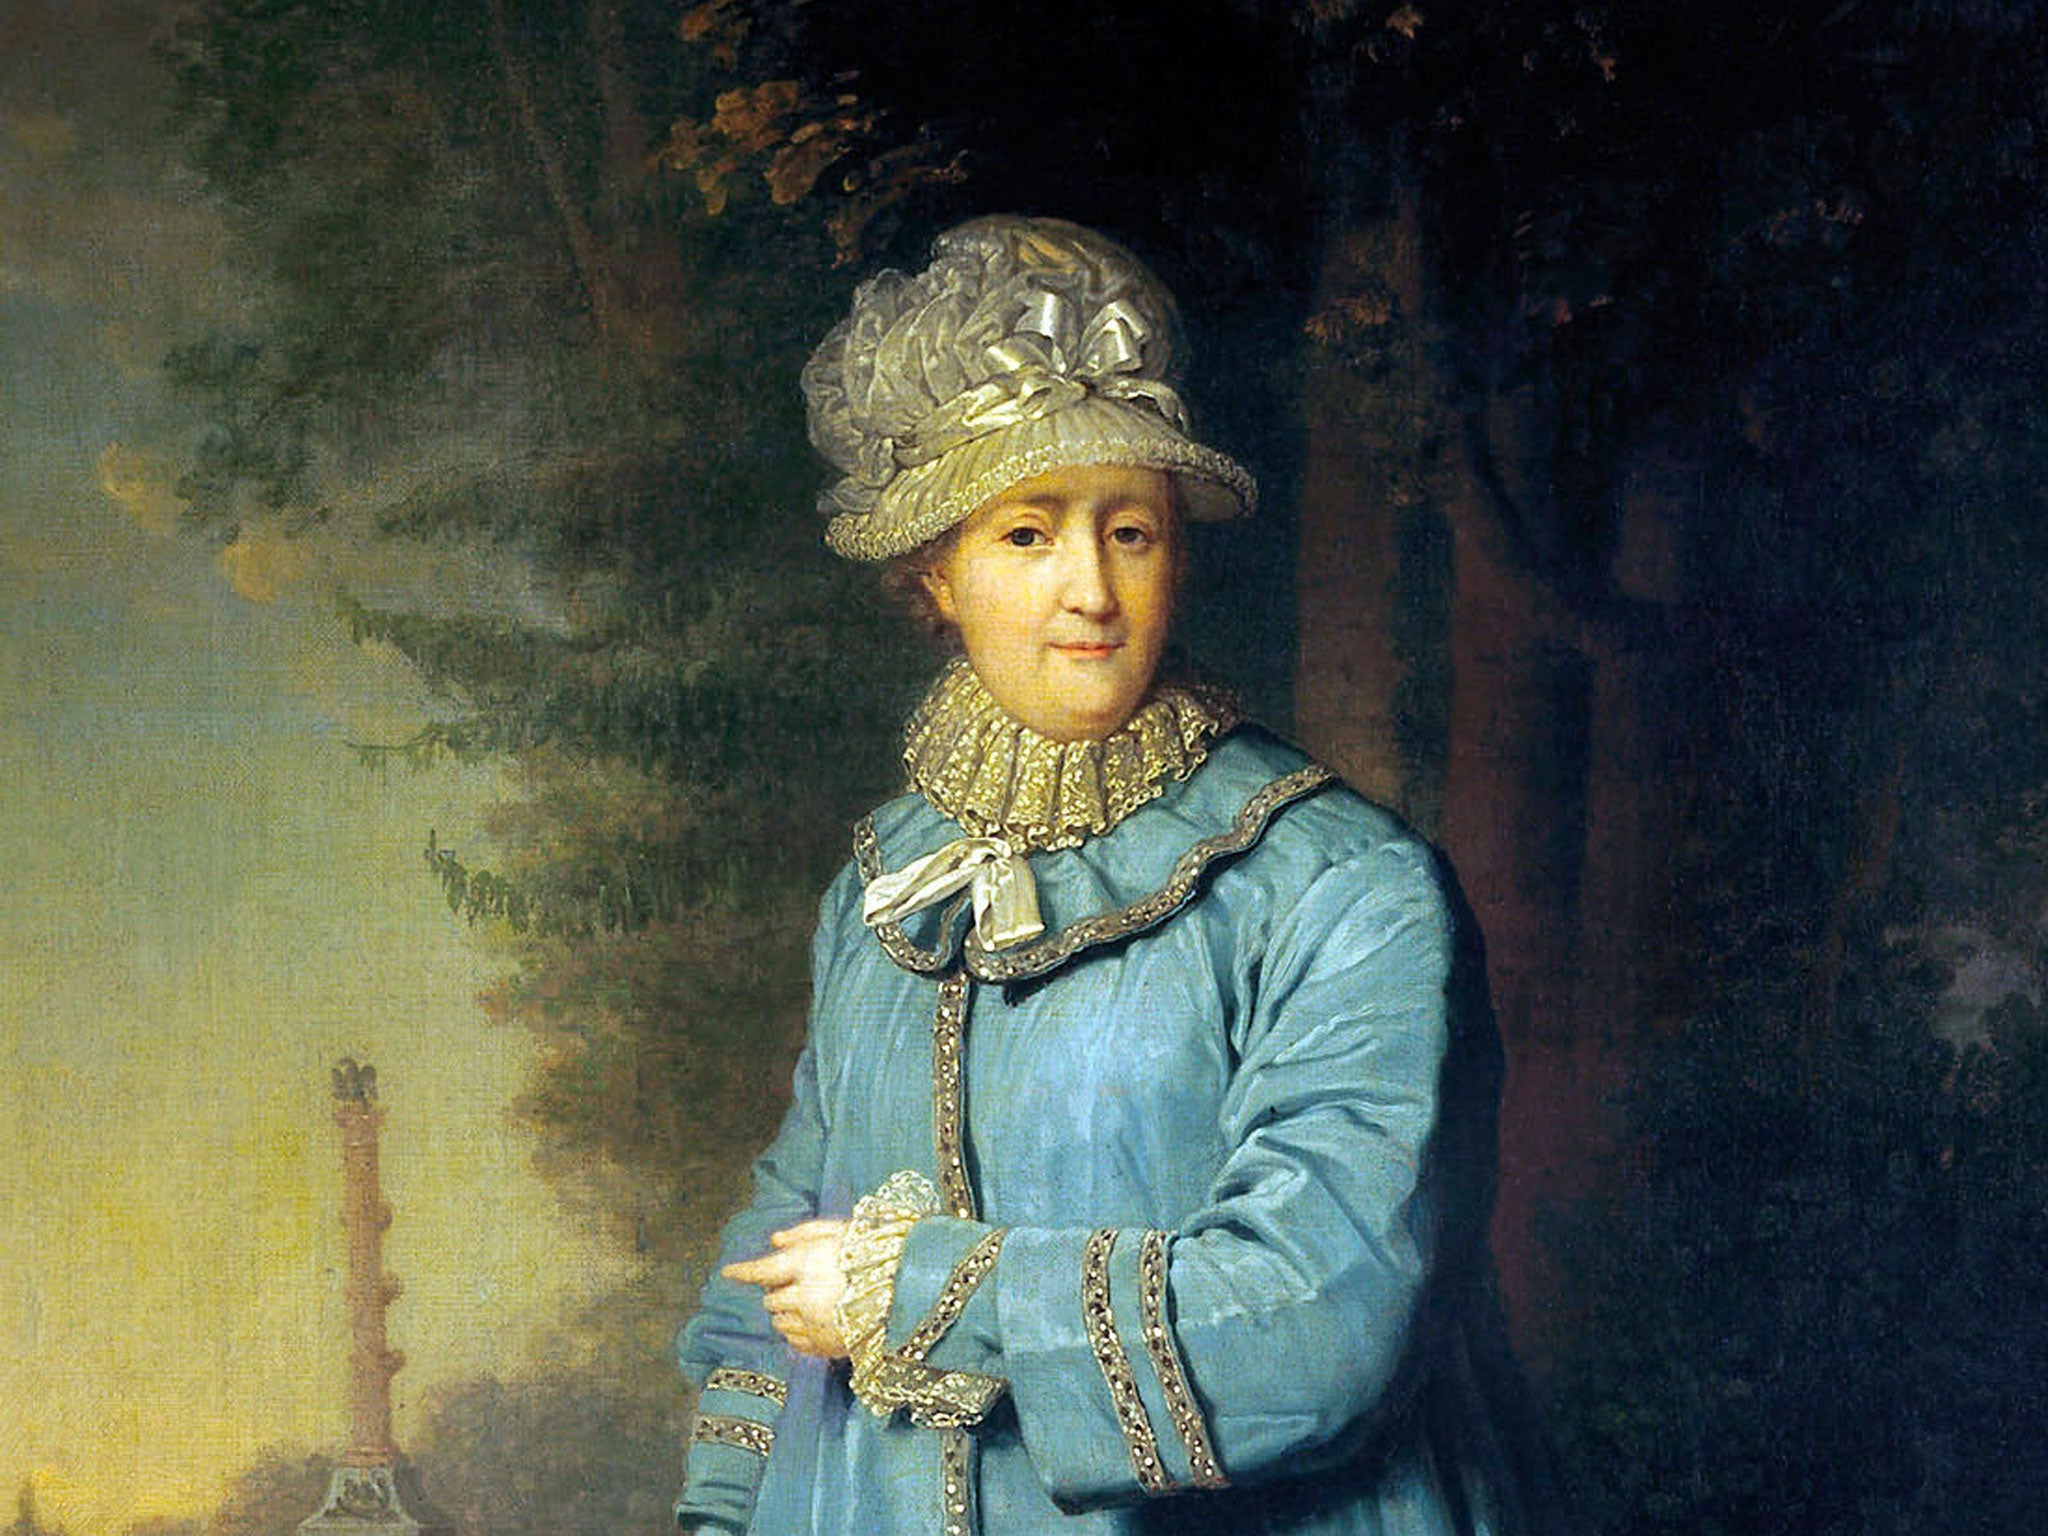 Catherine the Great, Russian empress